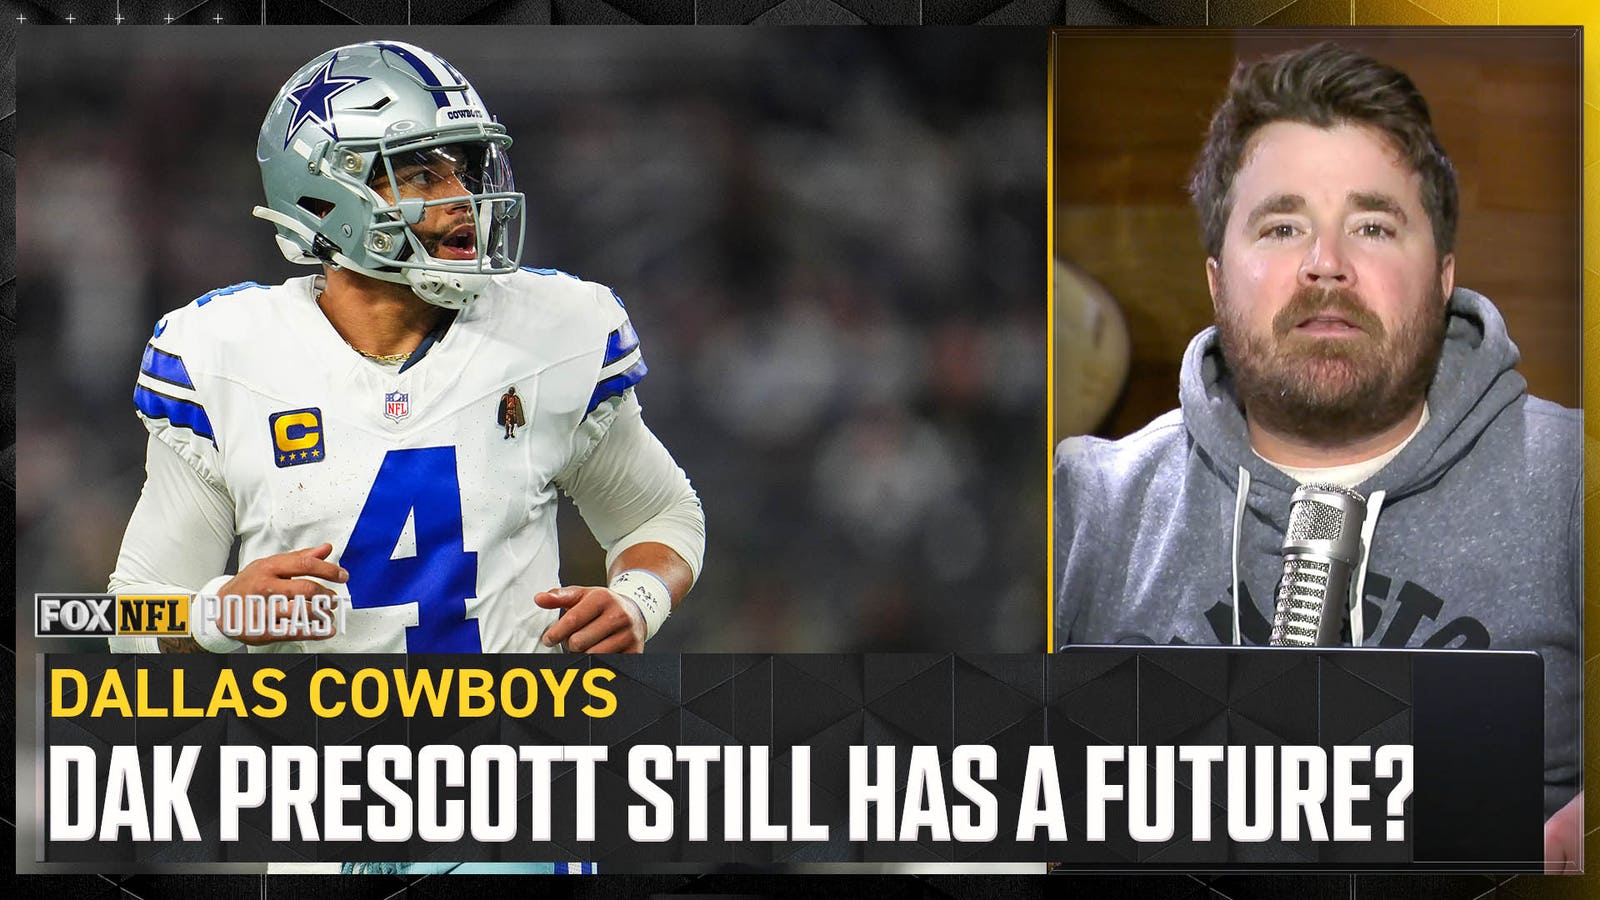 Does Dak Prescott still have a future with the Cowboys after poor finish? 